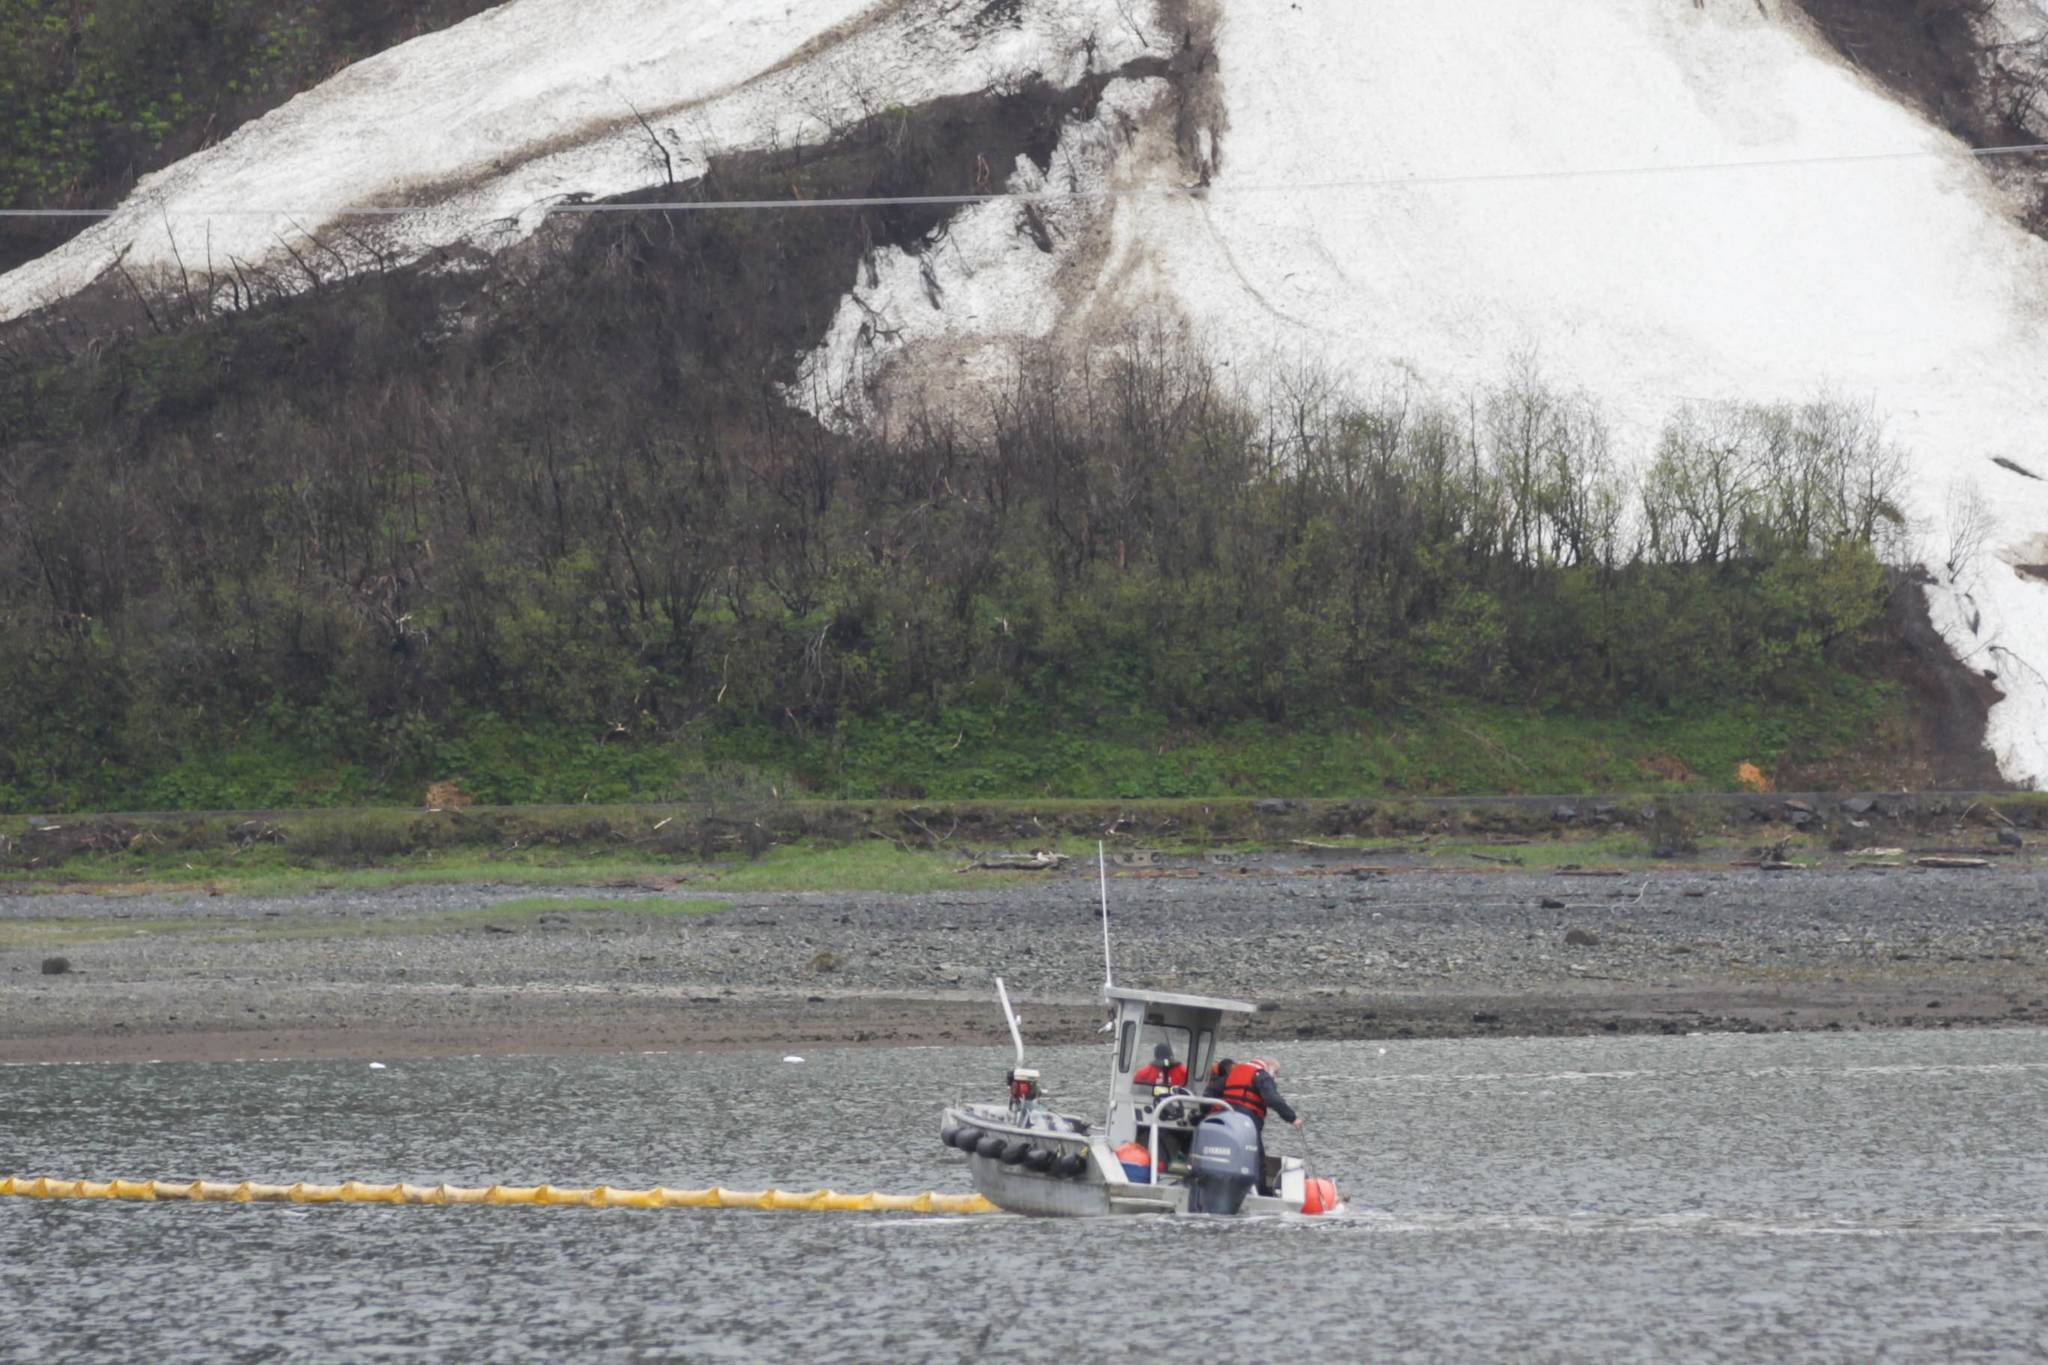 Coast Guardsmen and partner organizations practice oil spill cleanup in the Gastineau Channel near Sandy Beach on May 11. 2021. (Michael S. Lockett / Juneau Empire)